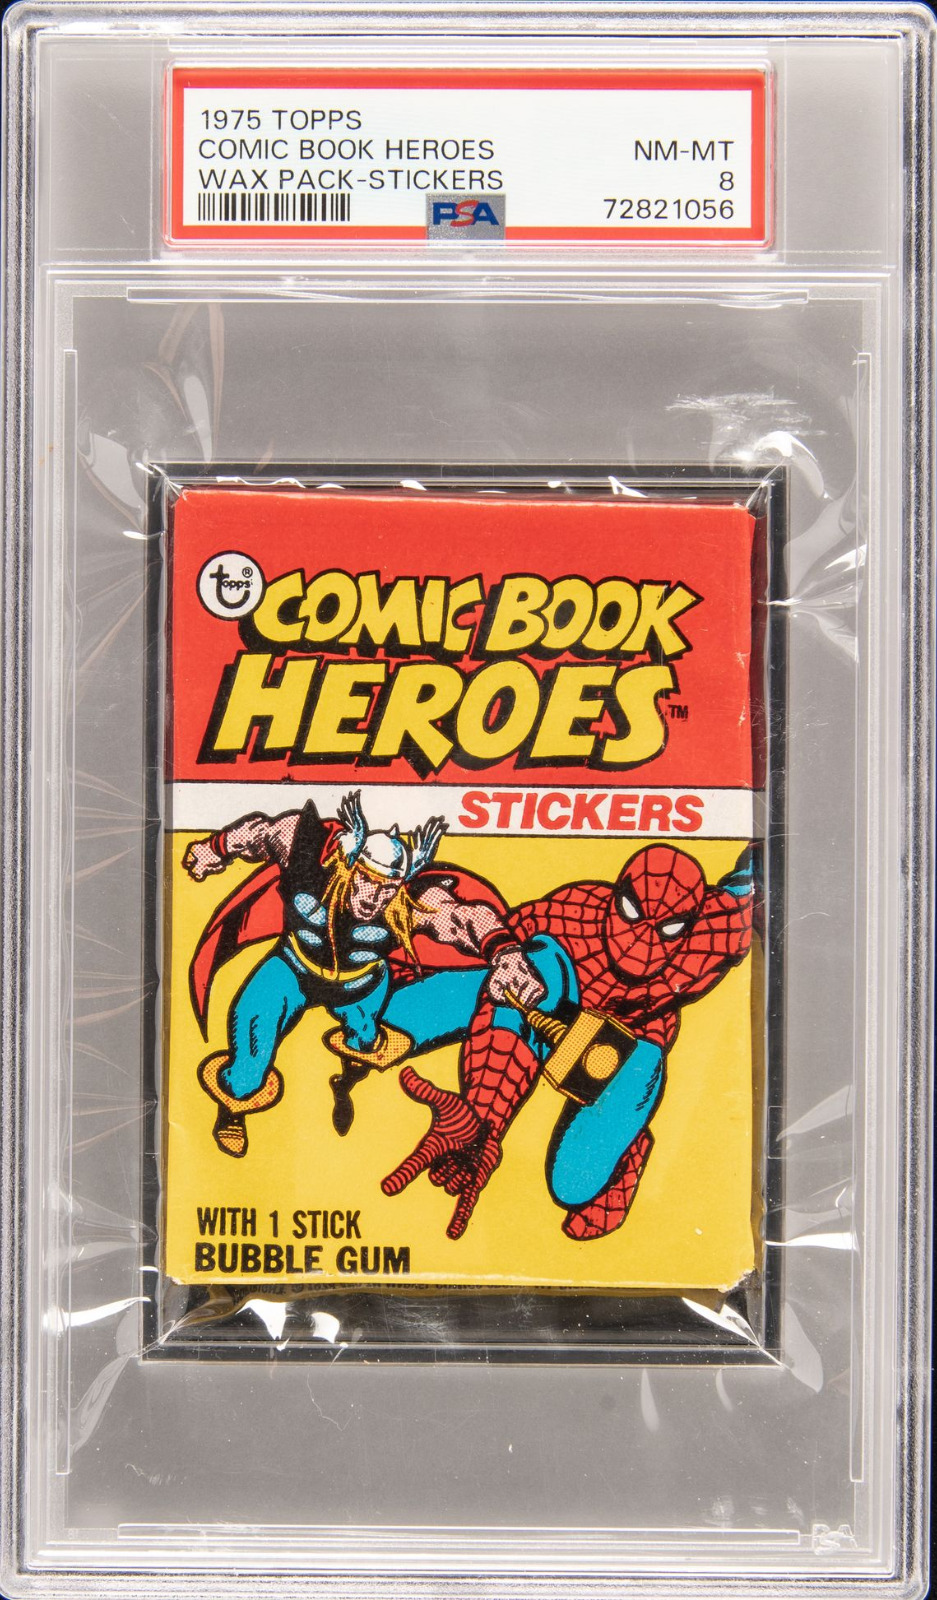 1975 Topps Wax Pack Stickers Comic Book Heroes - PSA NM-MT 8 read